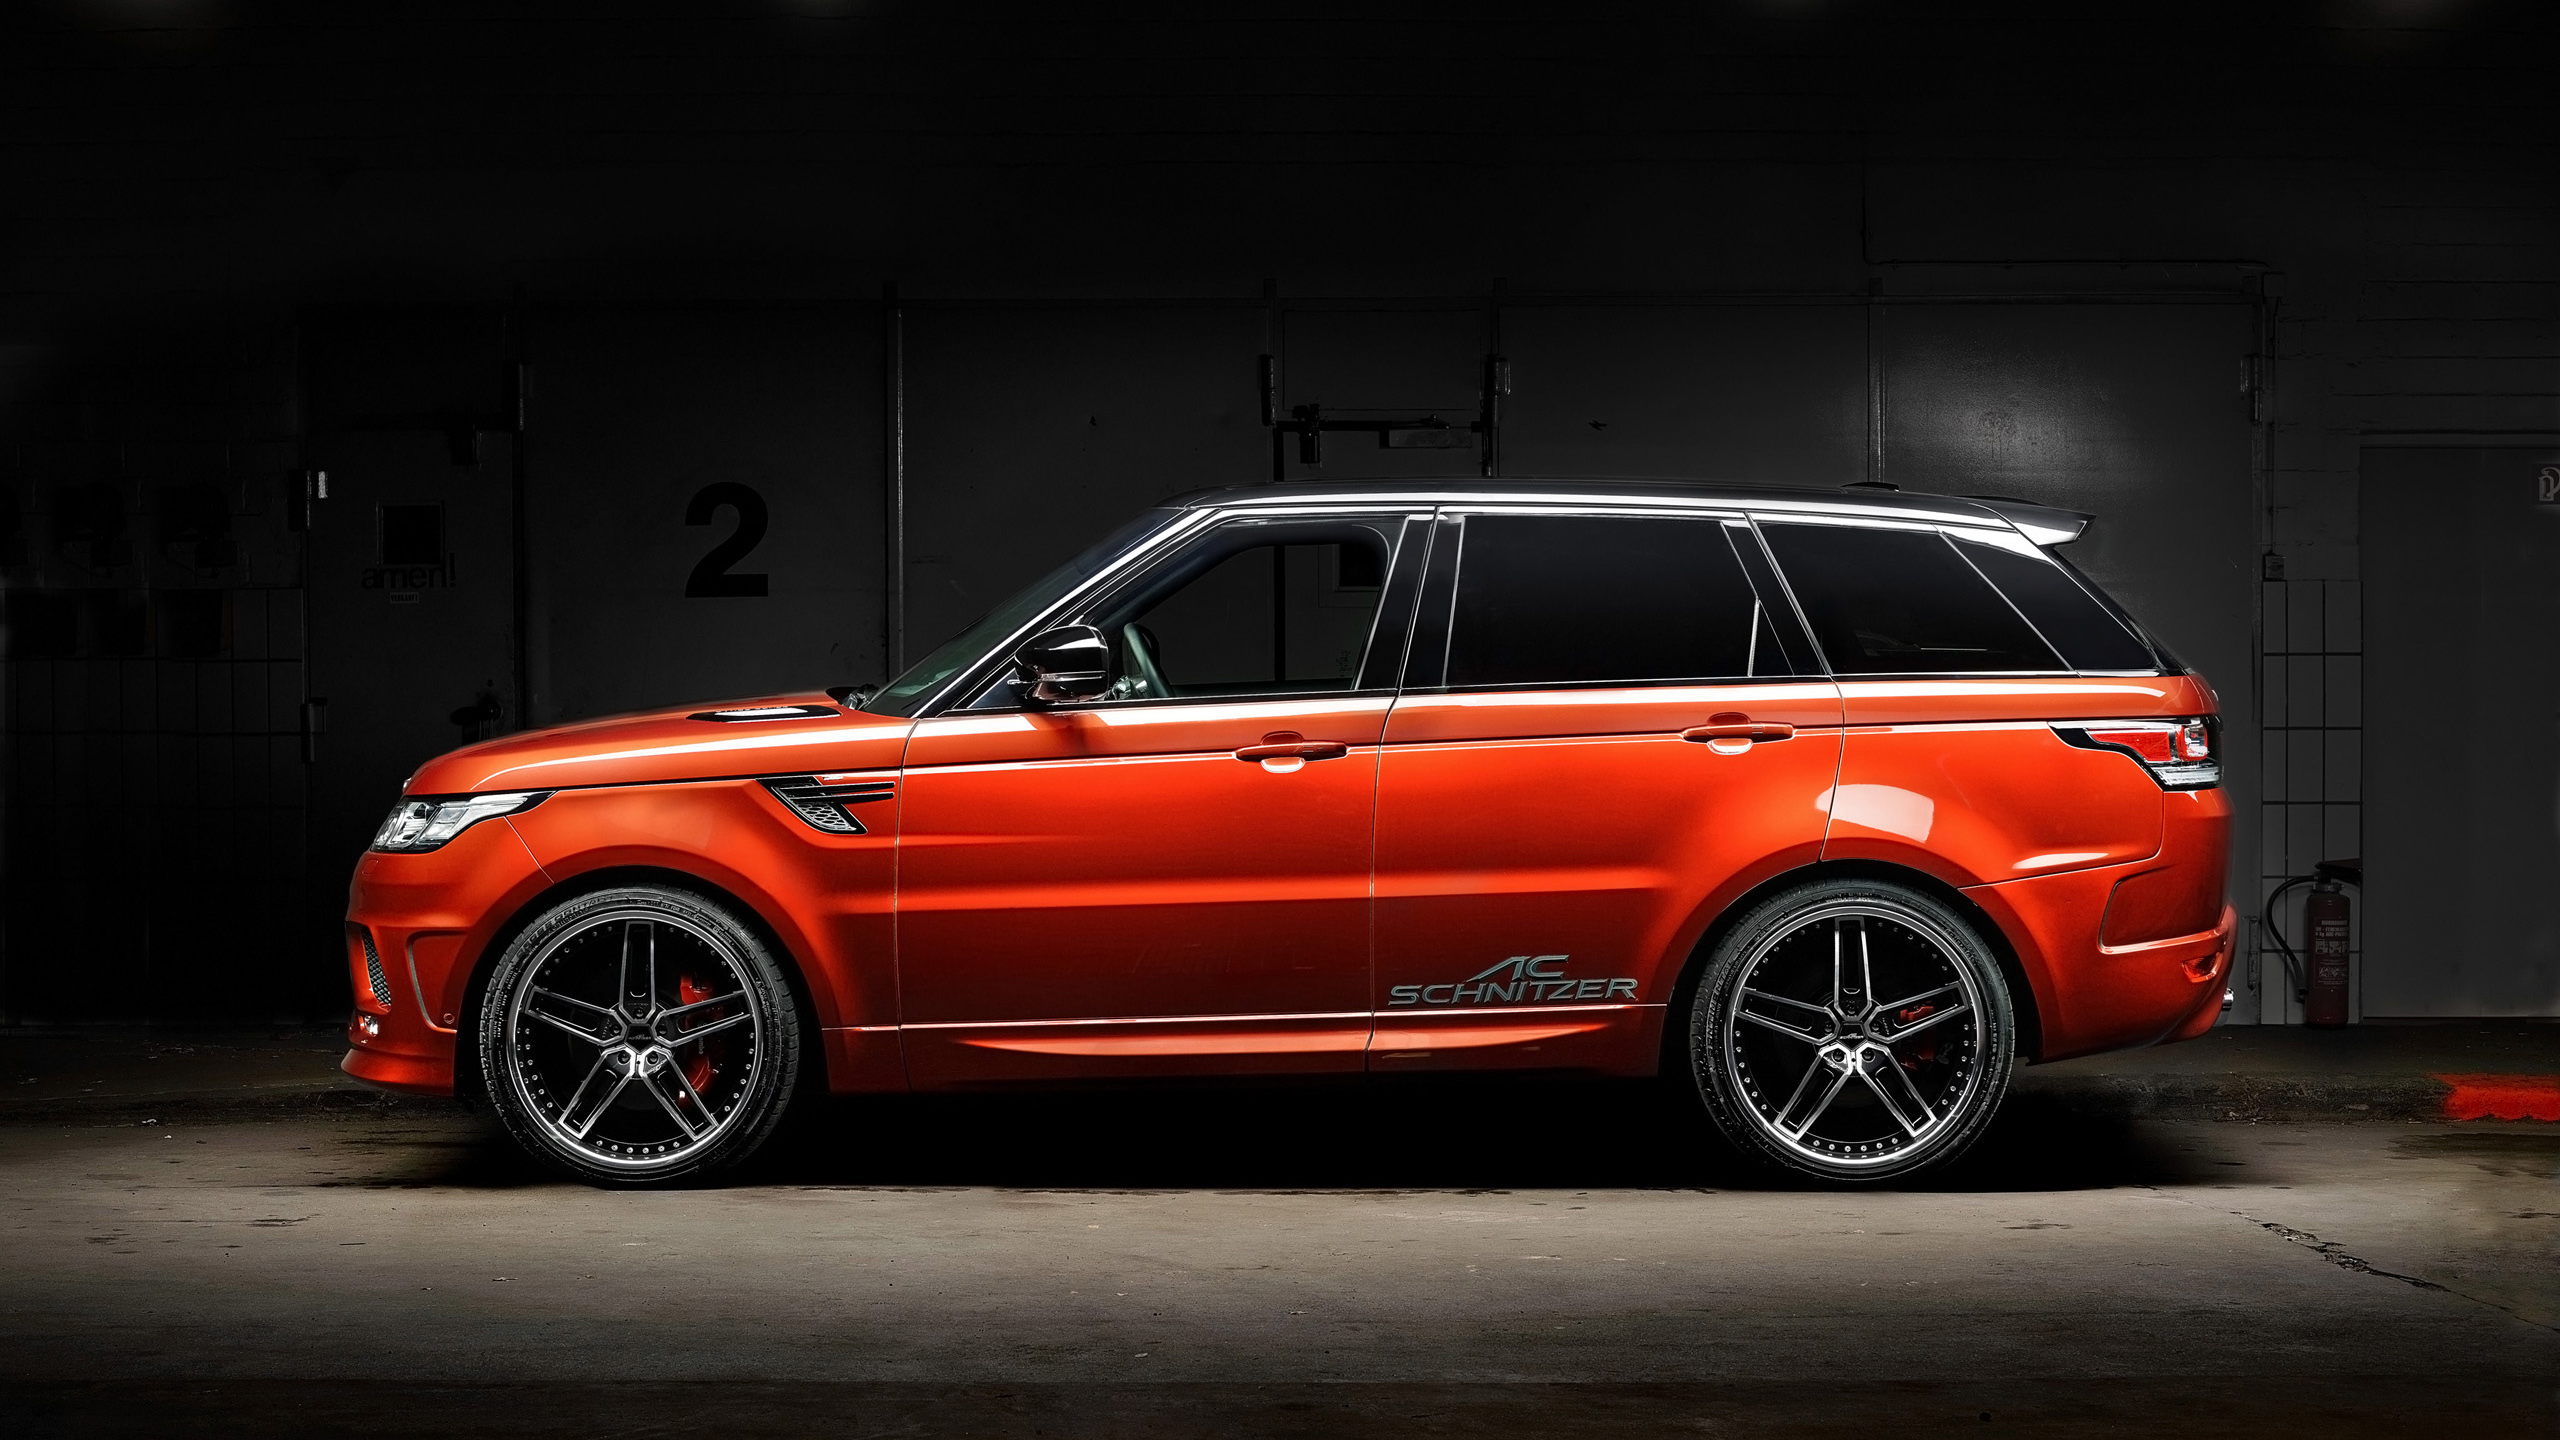 2014 Range Rover Sport By AC Schnitzer Wallpaper - HD Car Wallpapers #4232